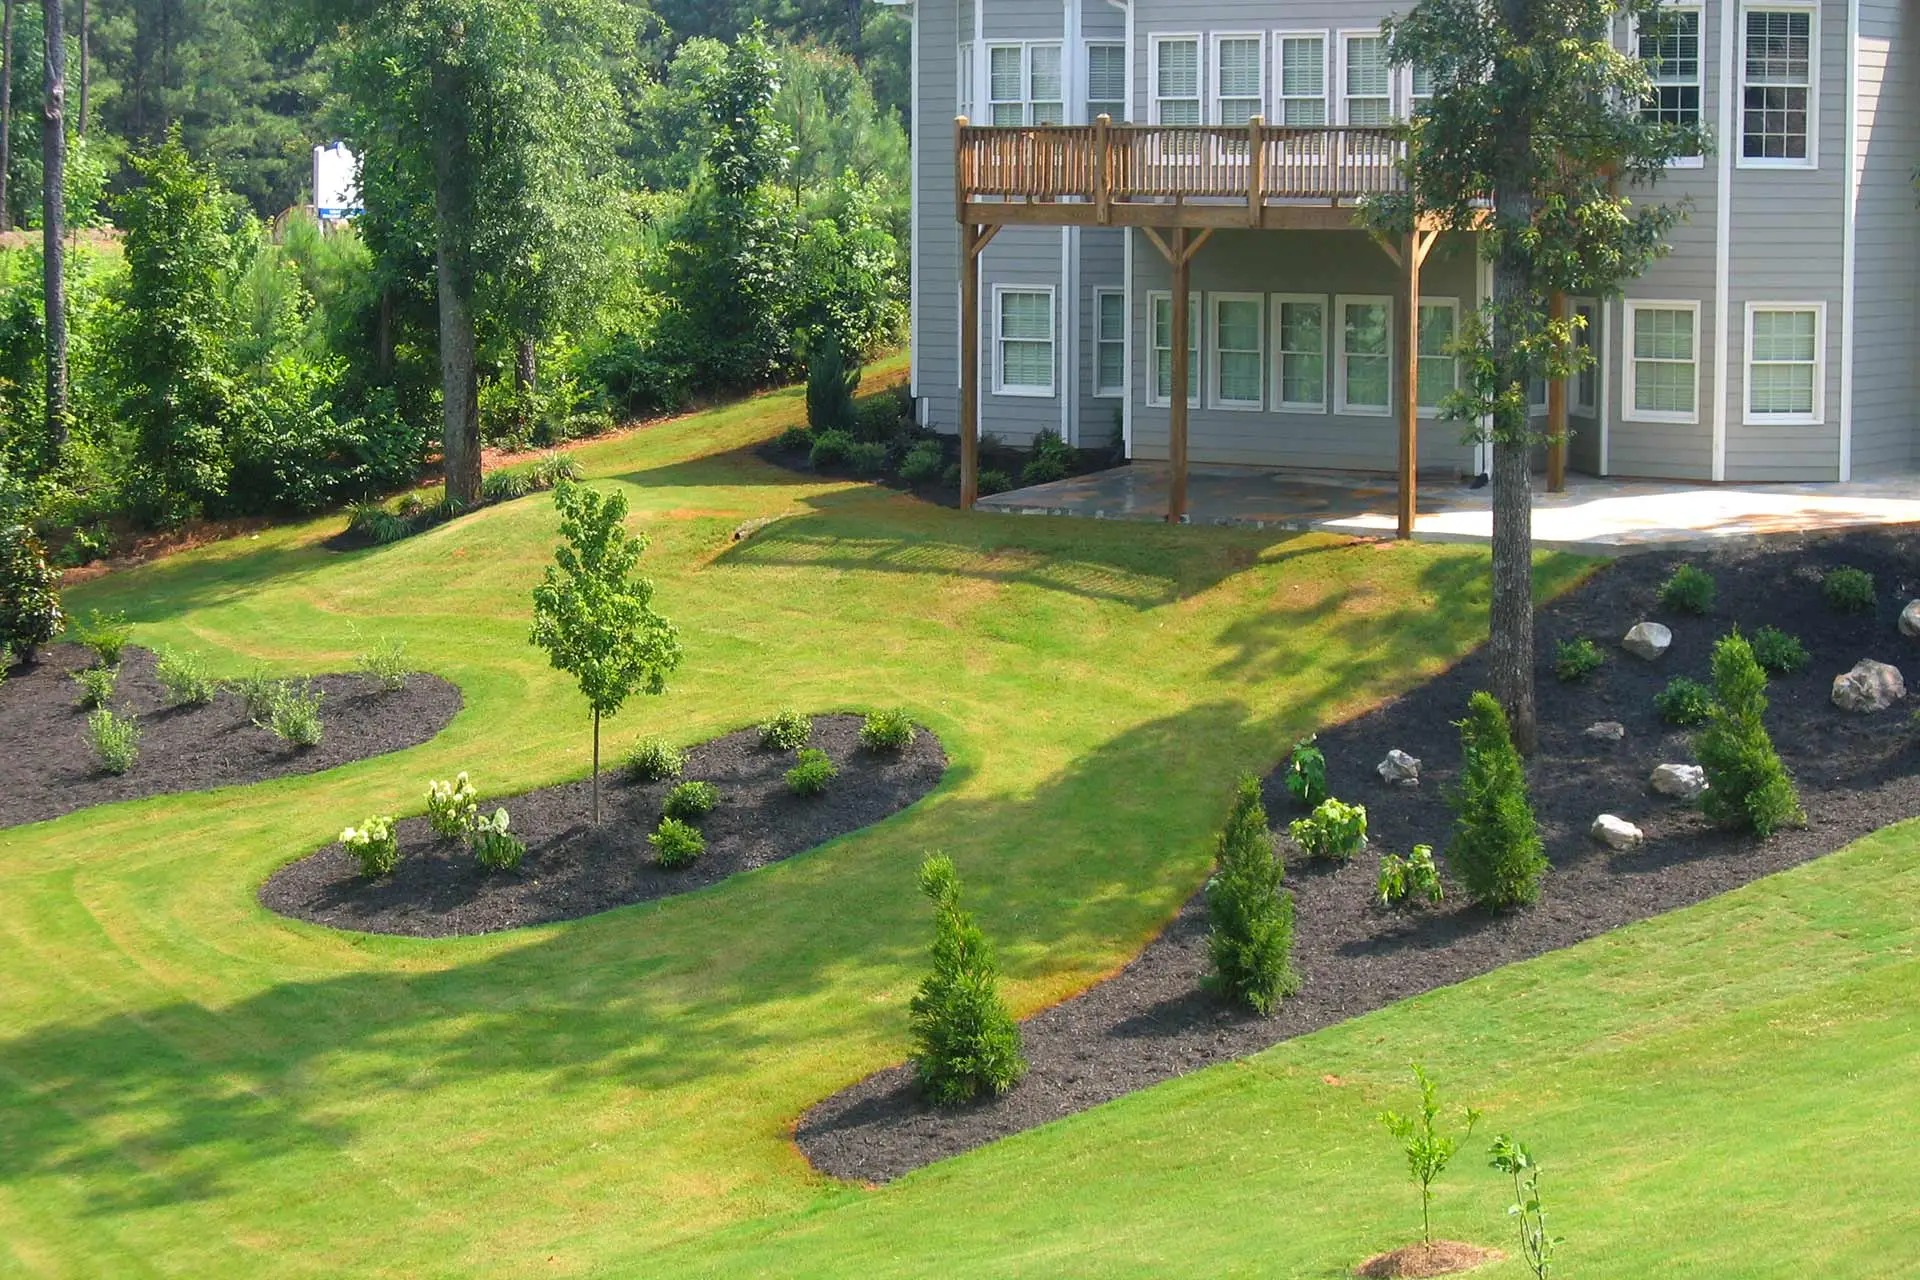 Elevated landscaping and mulch beds at a home property in Buckhead, GA.